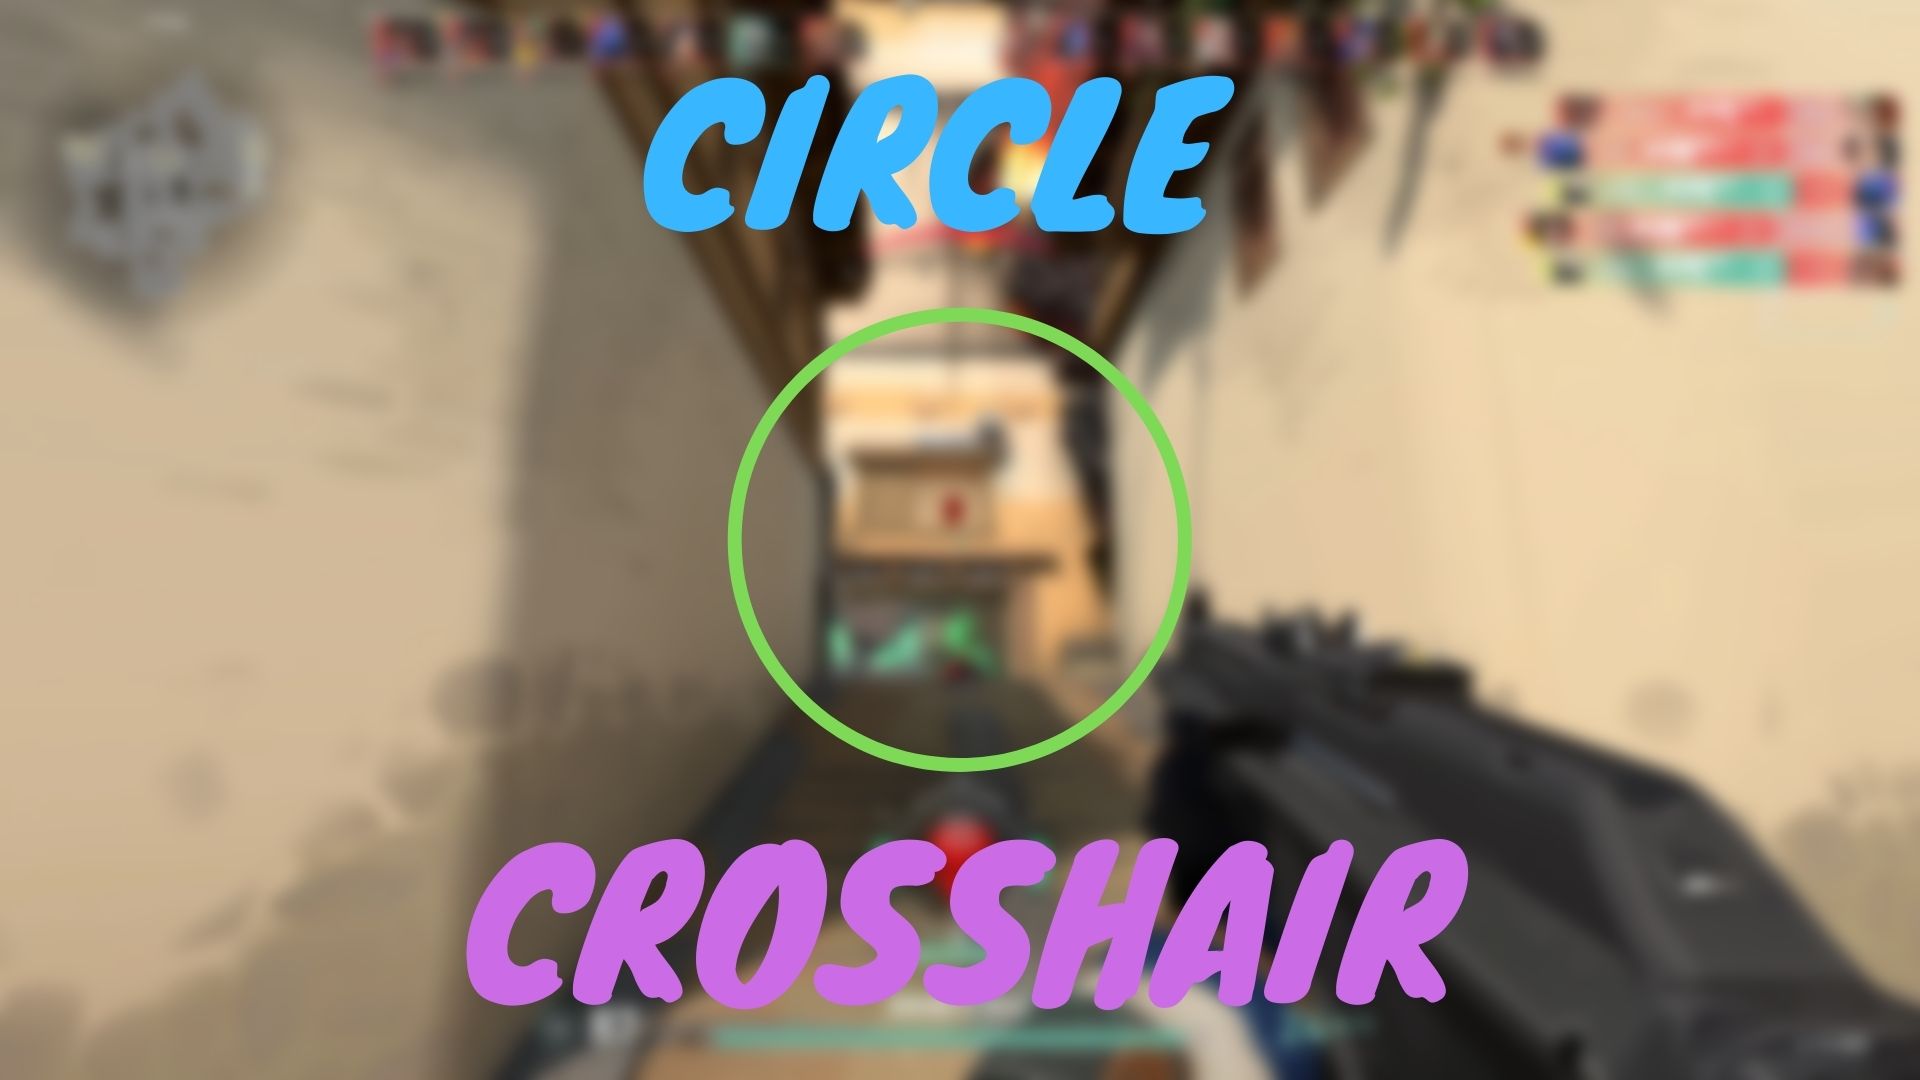 VALORANT: How to Make A Circle Crosshair